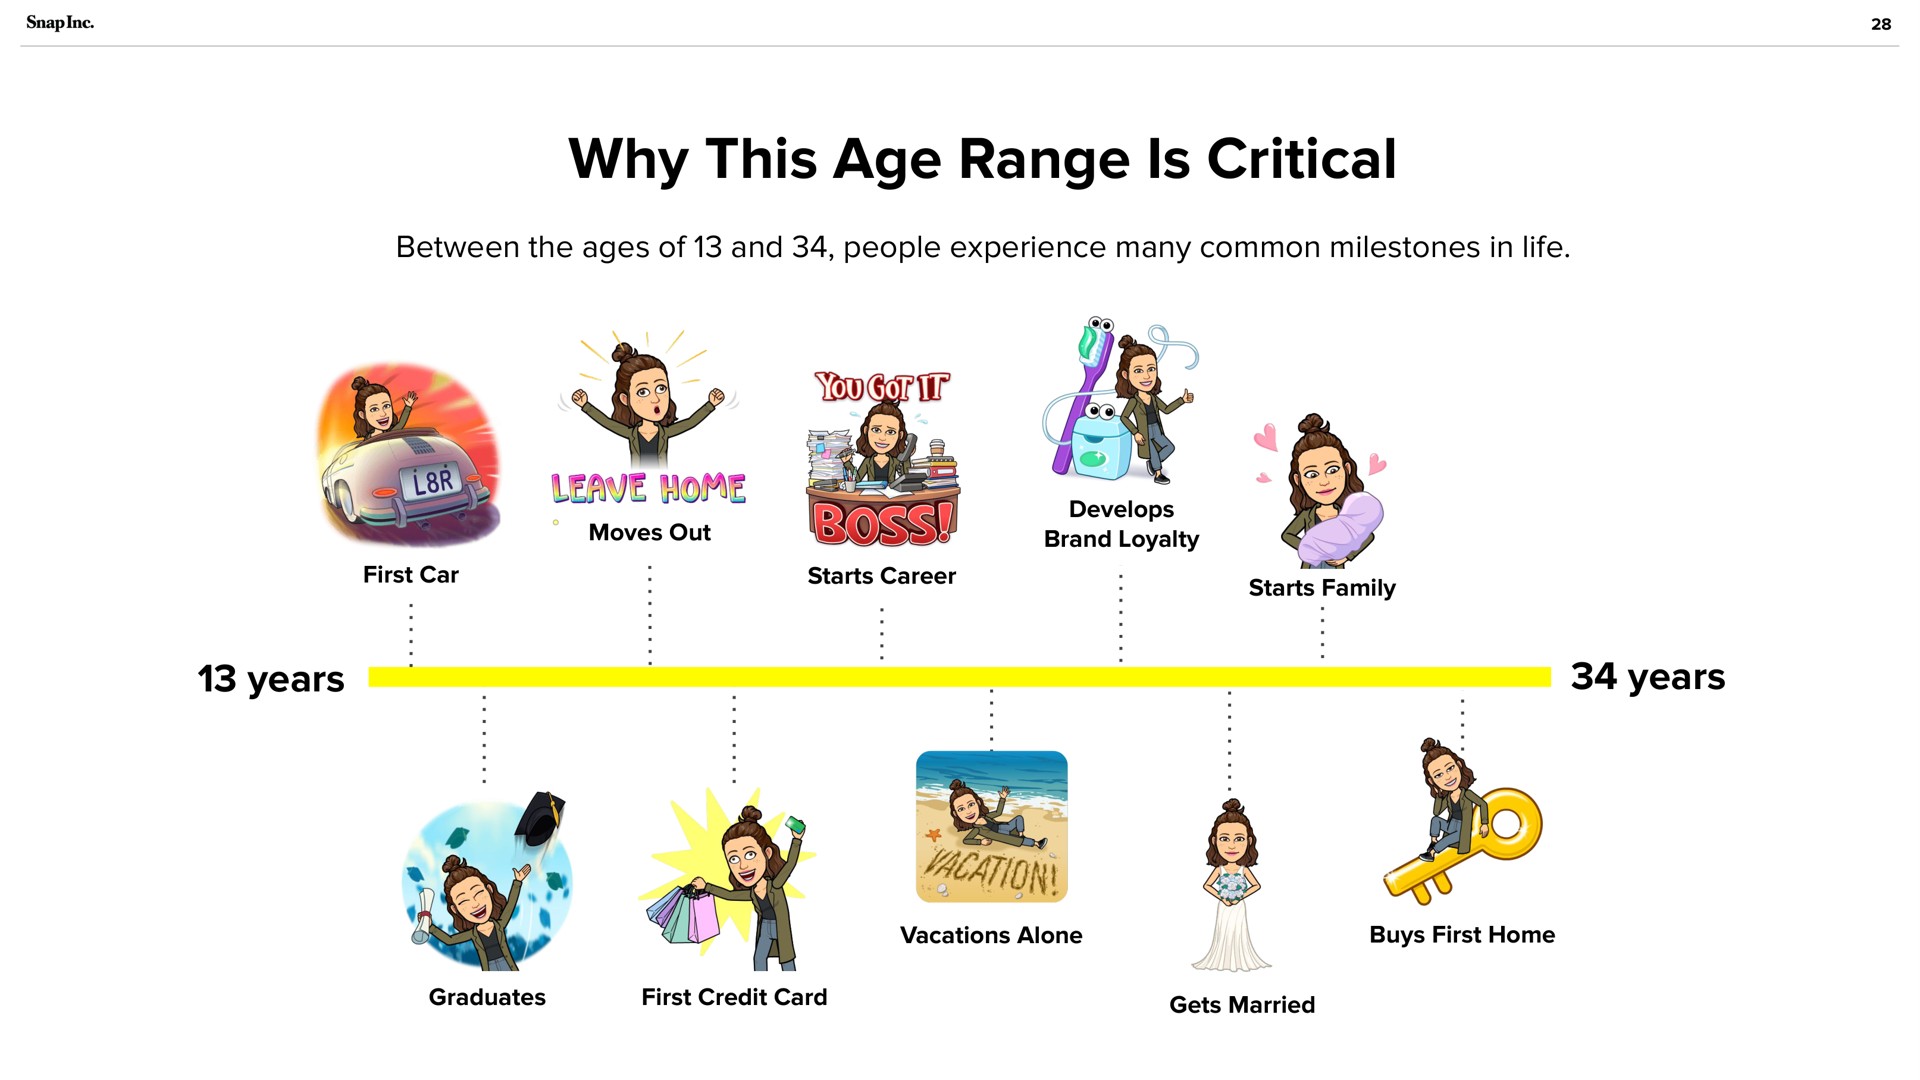 why this age range is critical | Snap Inc